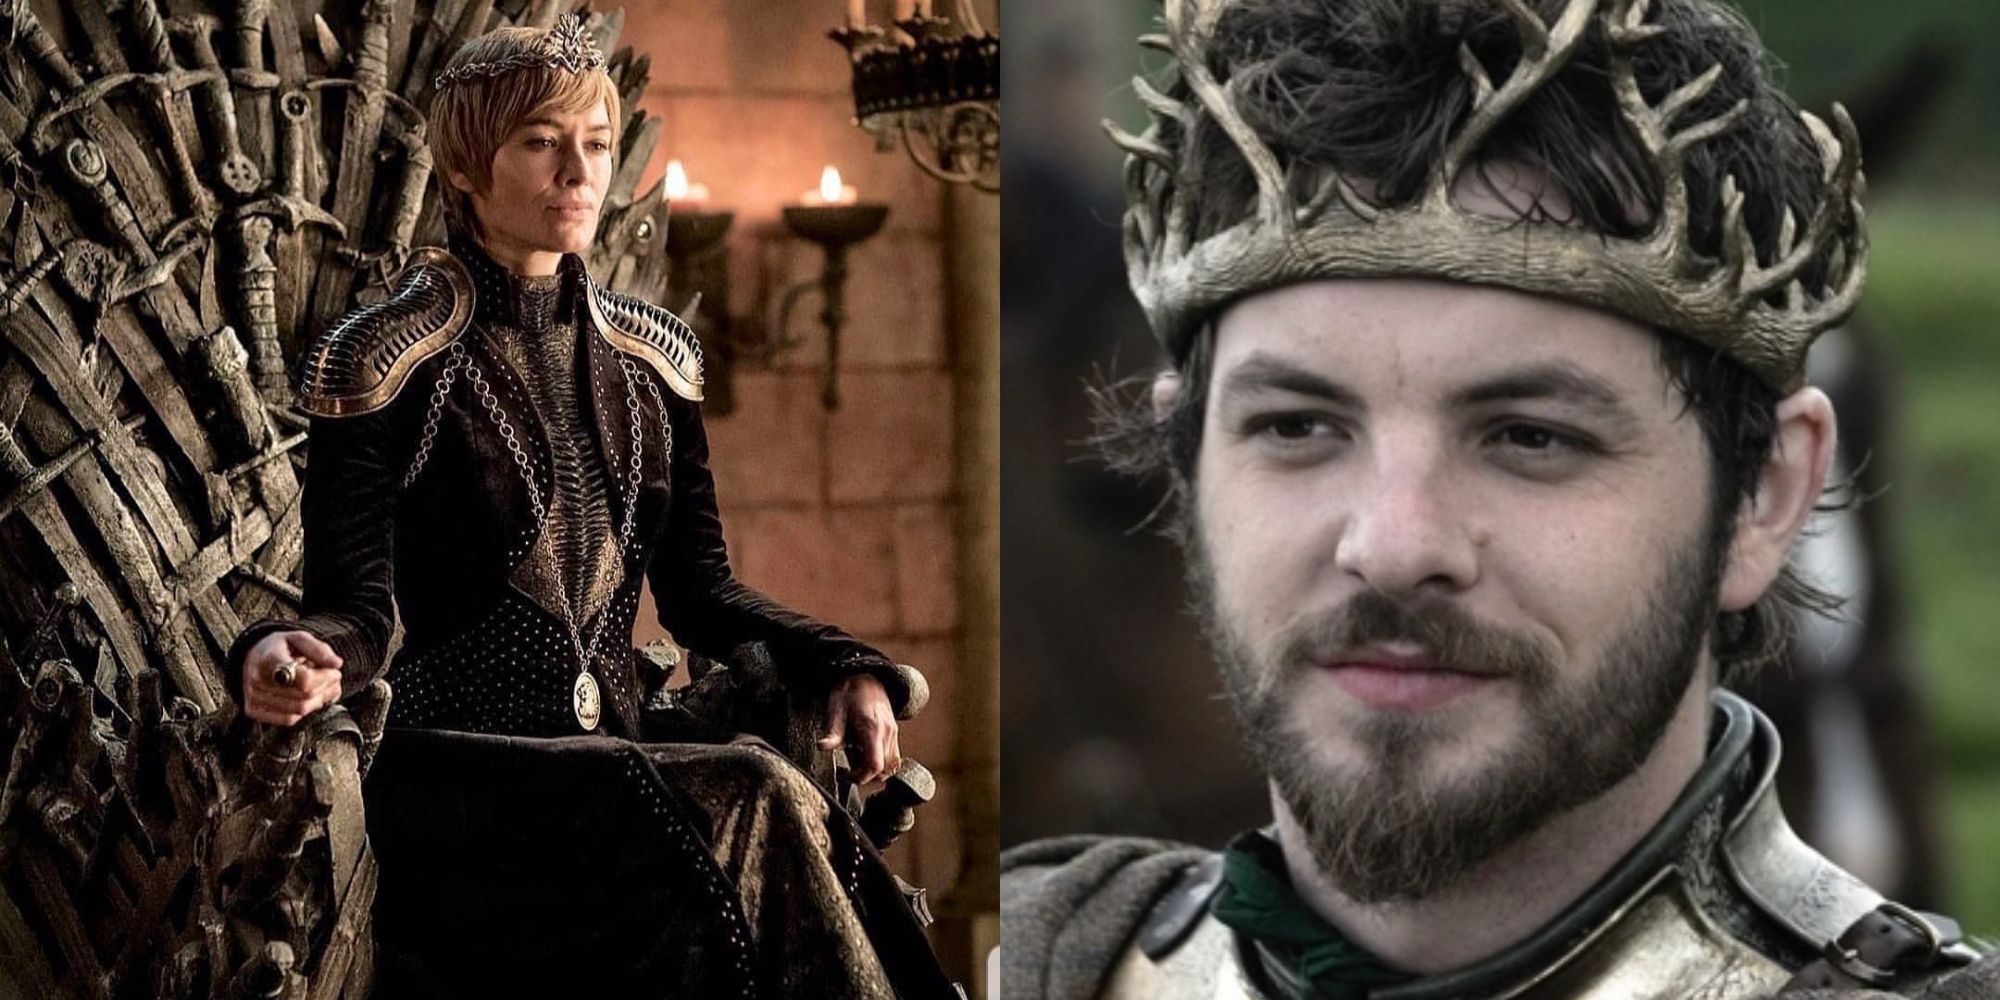 Split image showing Cersei Lannister and Renly Baratheon in Game of Thrones.